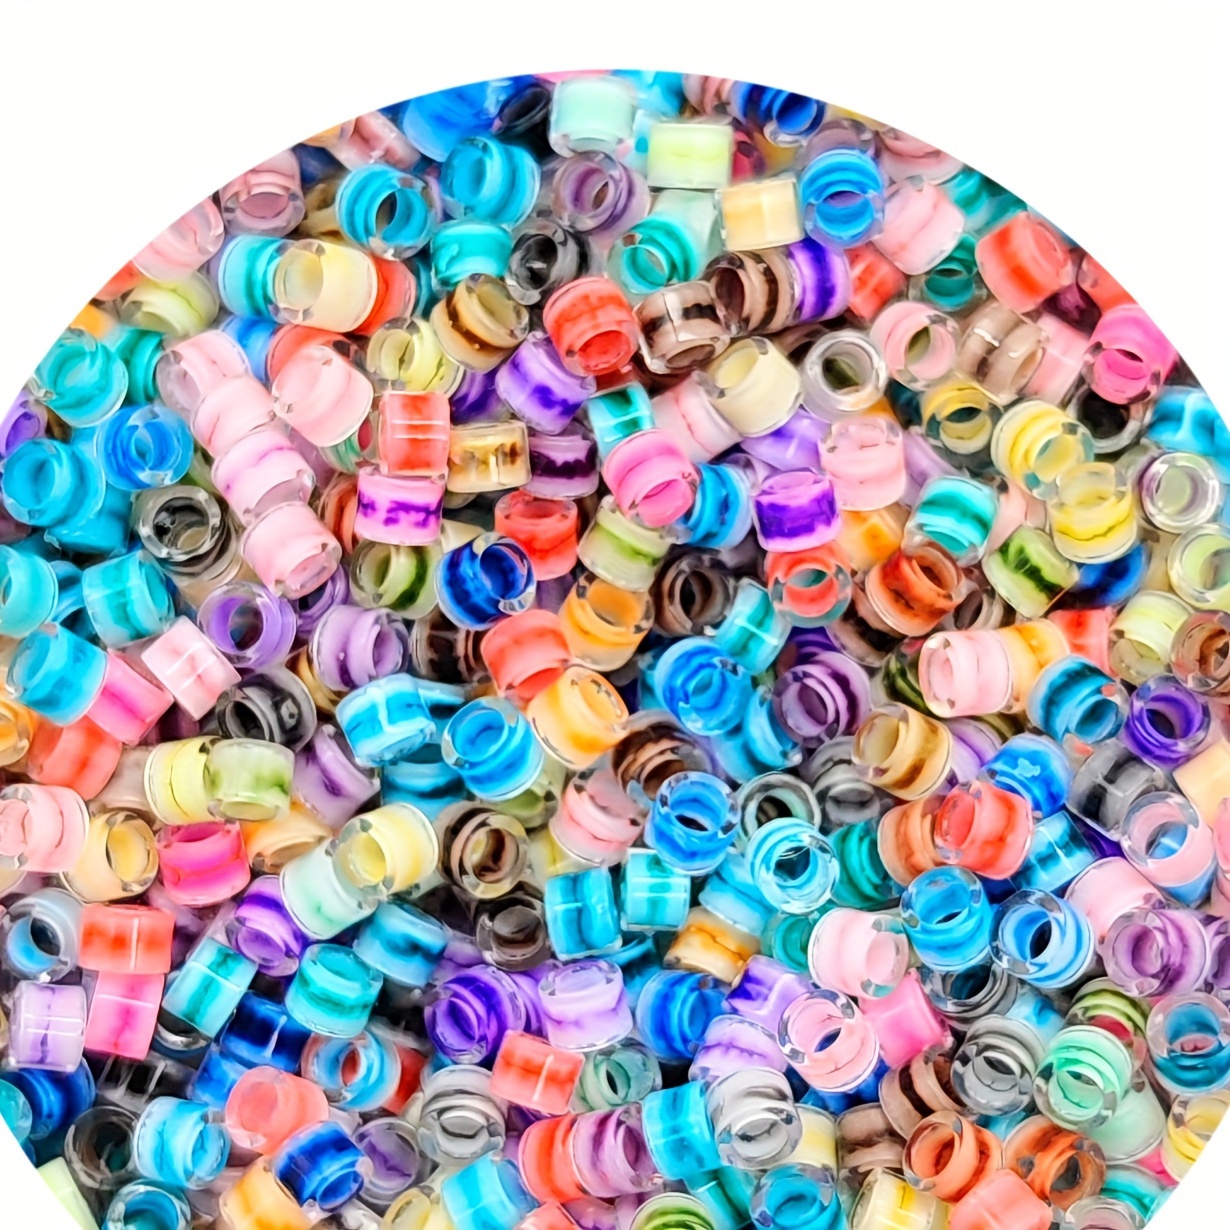 

600pcs Glass Seed Beads Assortment, 2.5mm Transparent Ink-dyed Core, Diy Handmade Jewelry Making Kit For Bracelets, Necklaces, Rings And Earrings Accessories